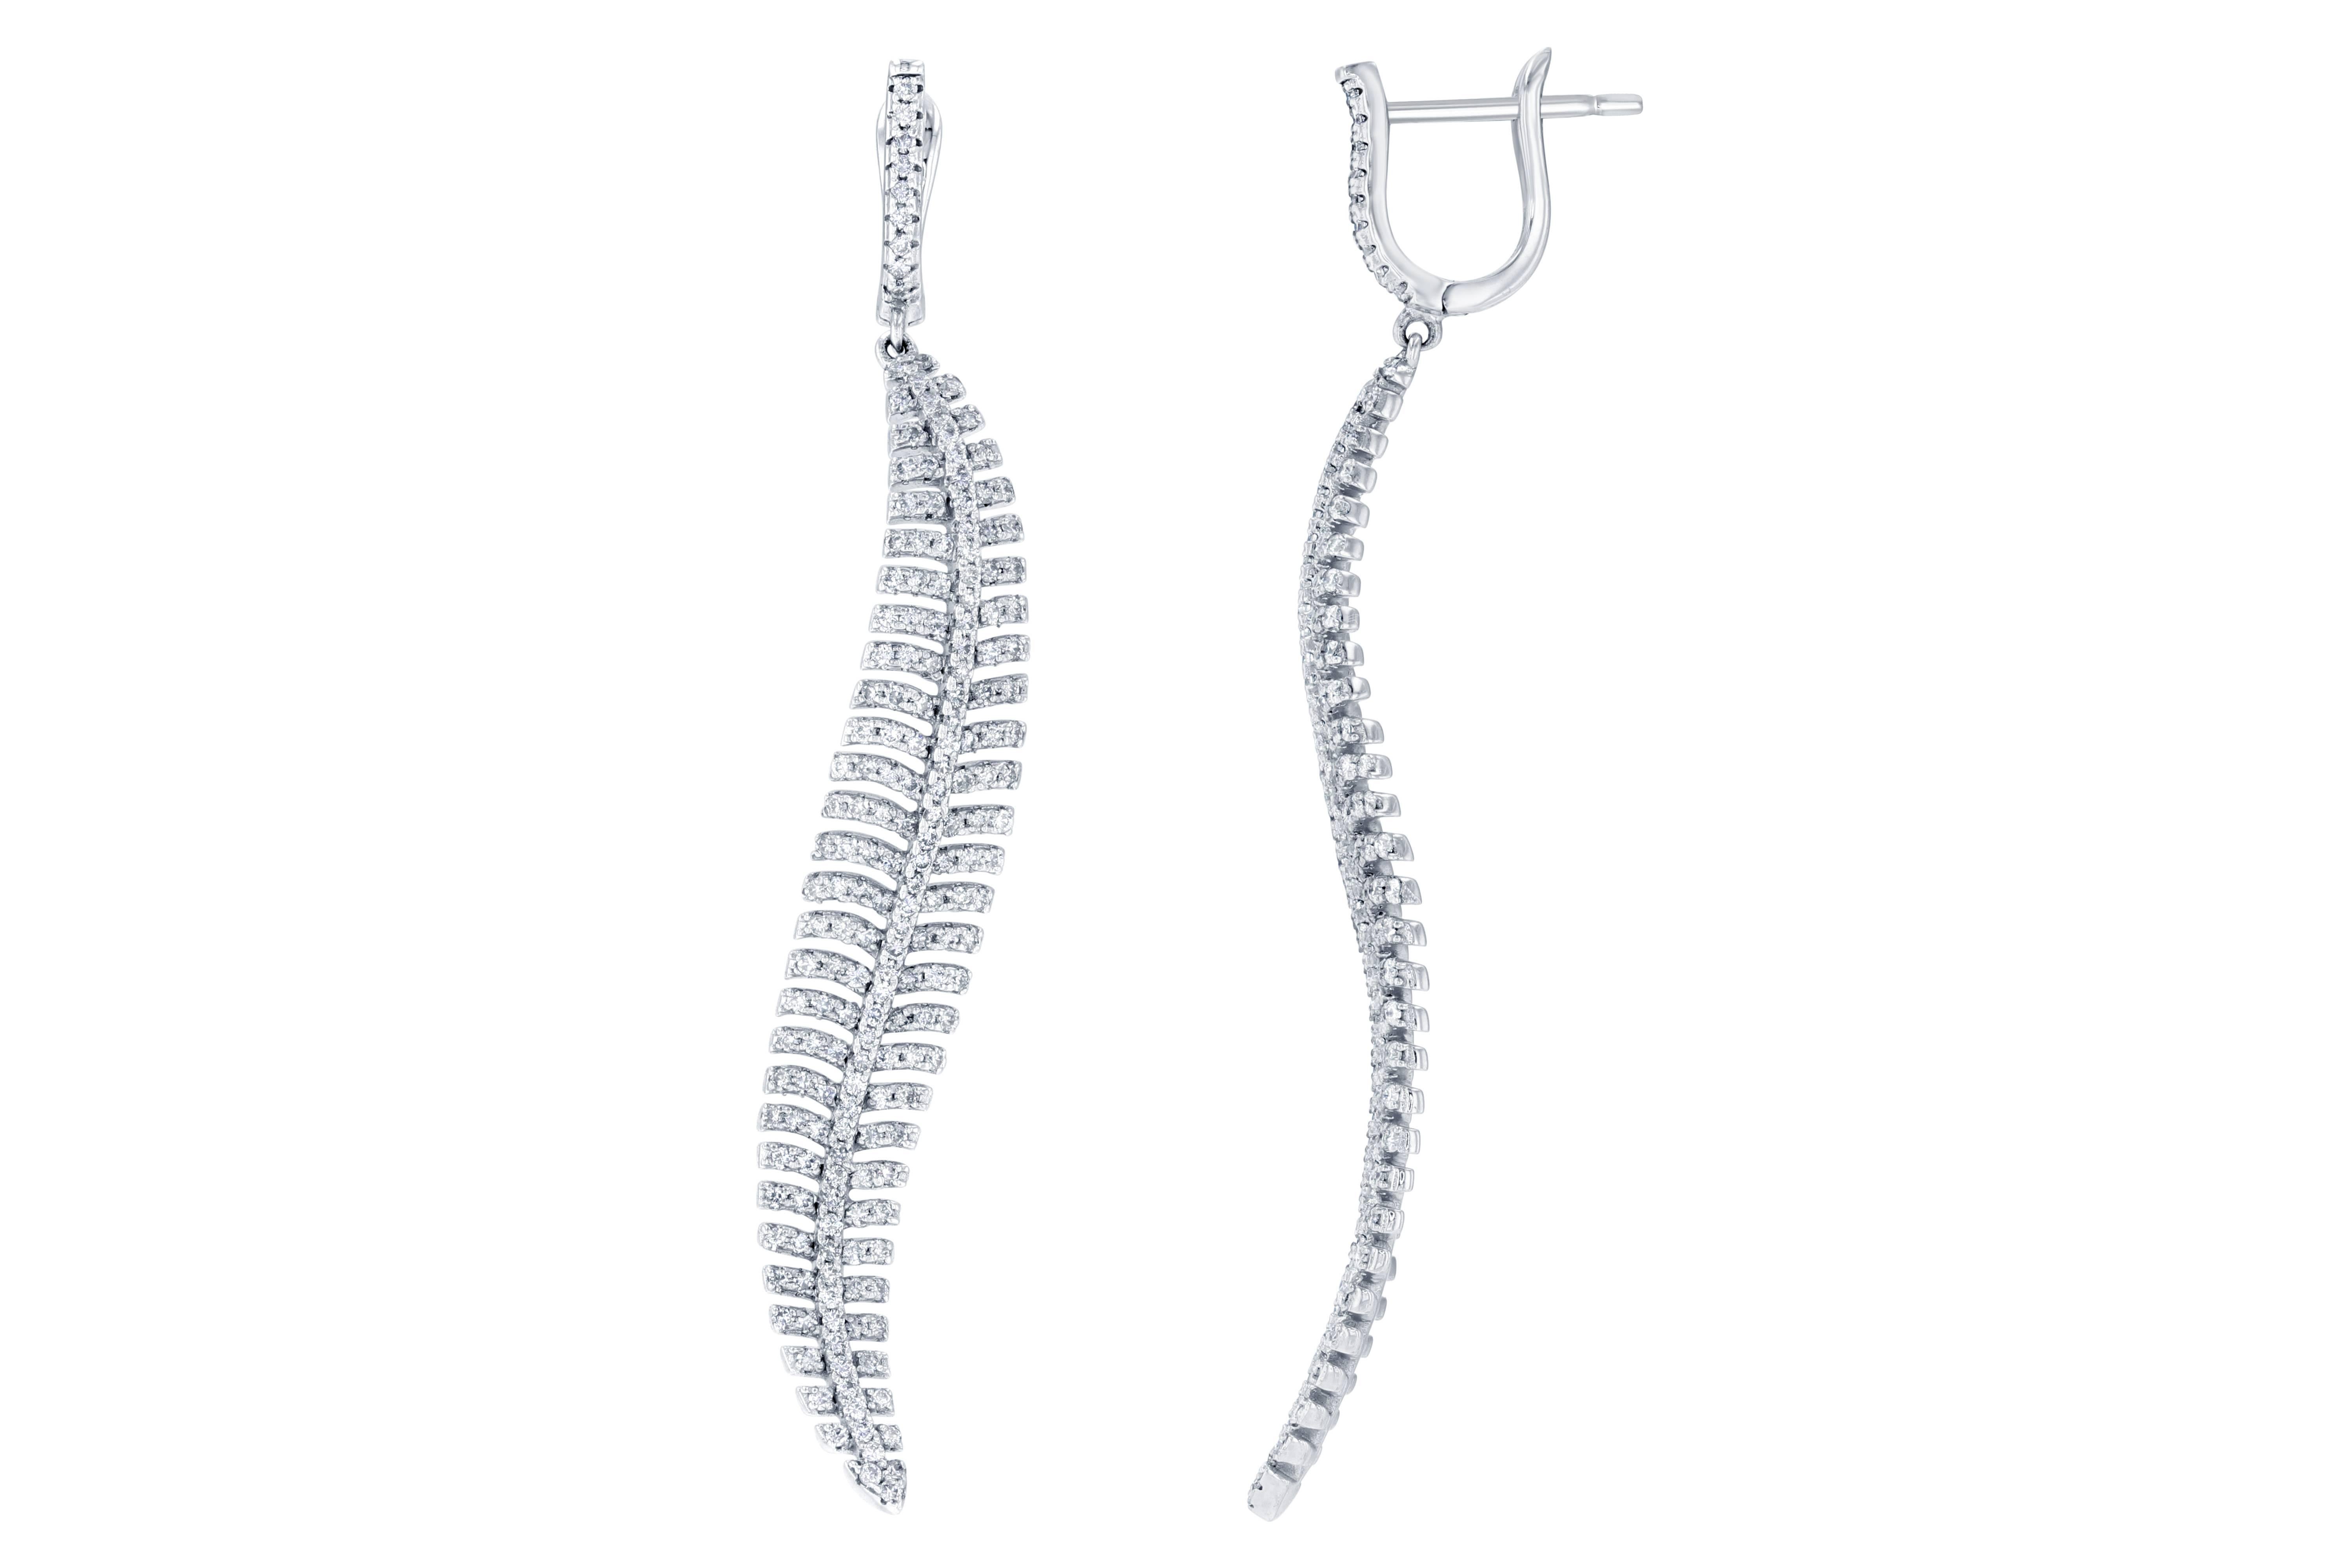 These delicate, yet intricate feather design earrings are sure to compliment everyone's wardrobe!  The earrings are approximately 2.75 inches long.  There are 382 Round Cut Diamonds that weigh 2.33 carats (Clarity: VS2/Color: F).  Made in 14K White